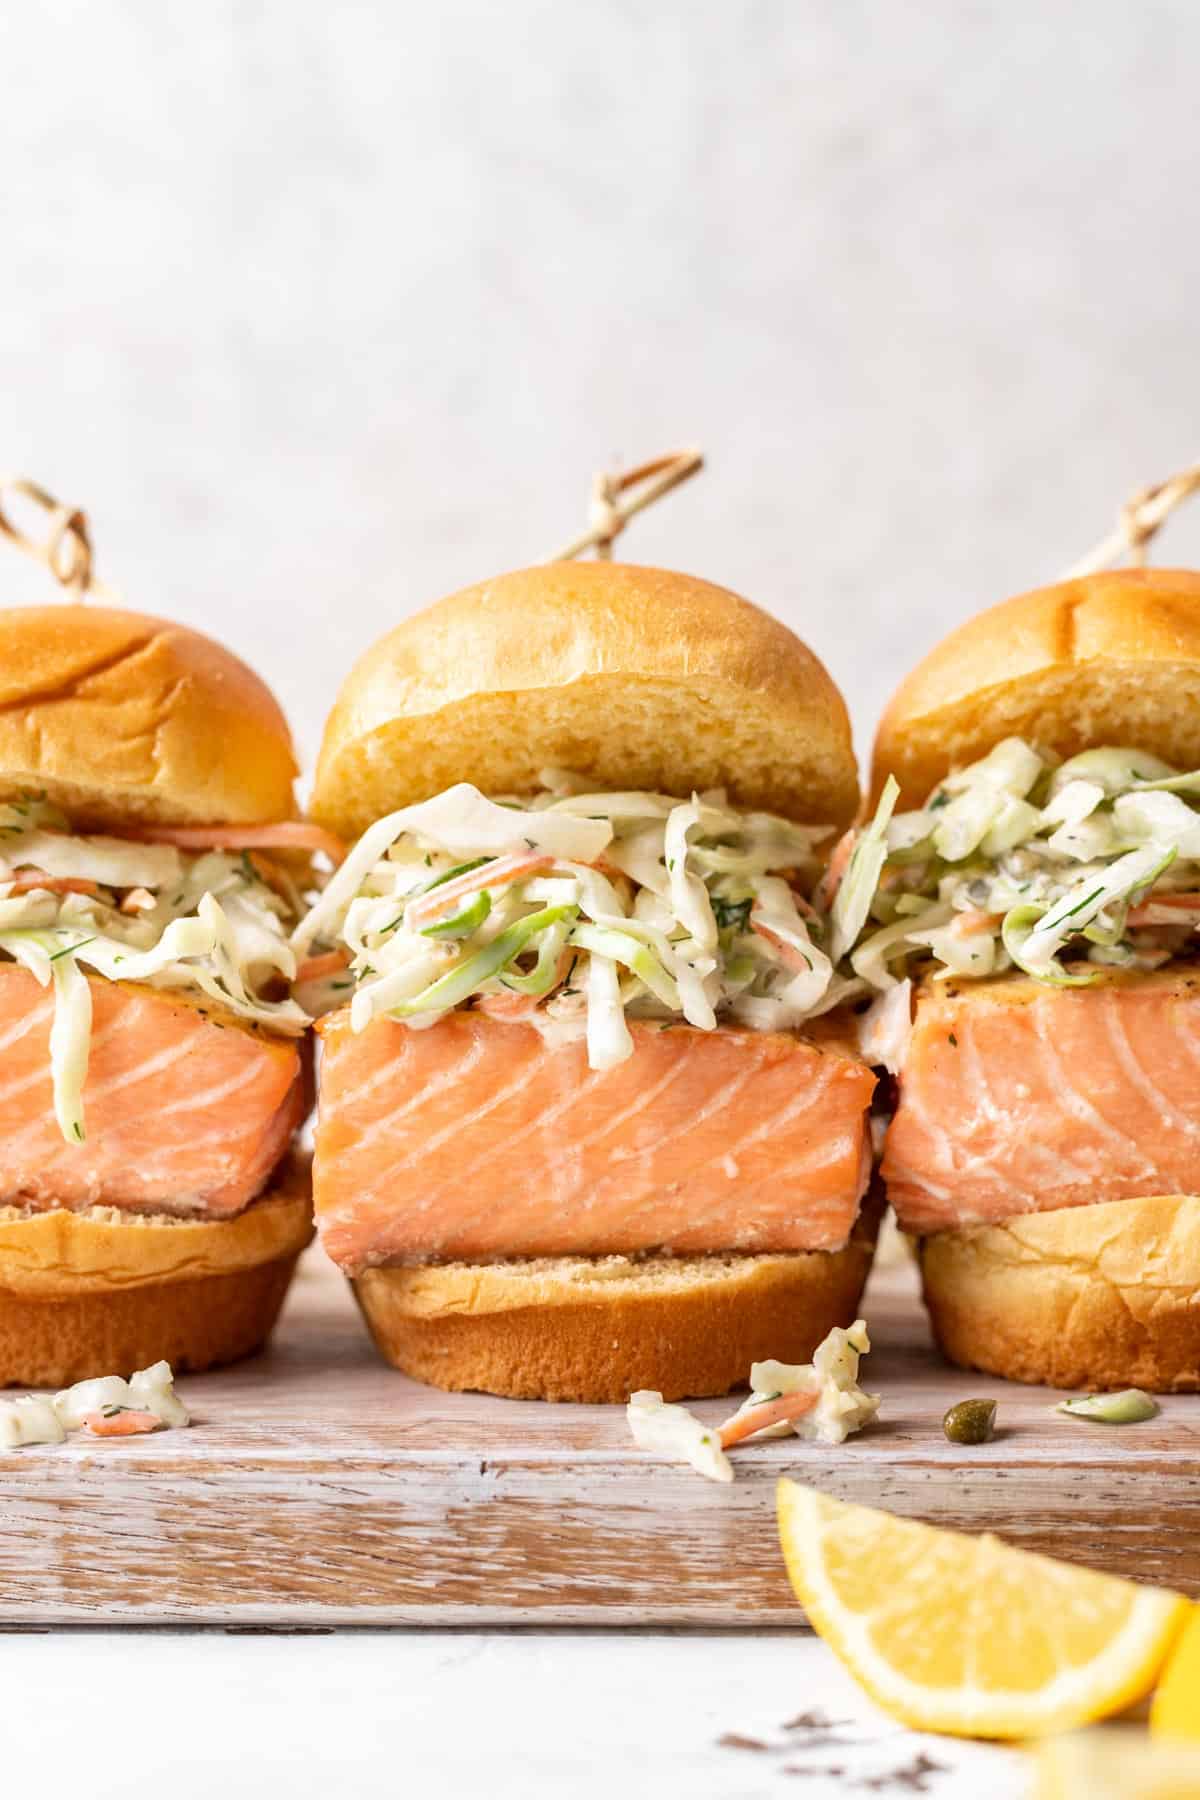 Salmon sliders with brioche buns and caper dill slaw on a serving tray.